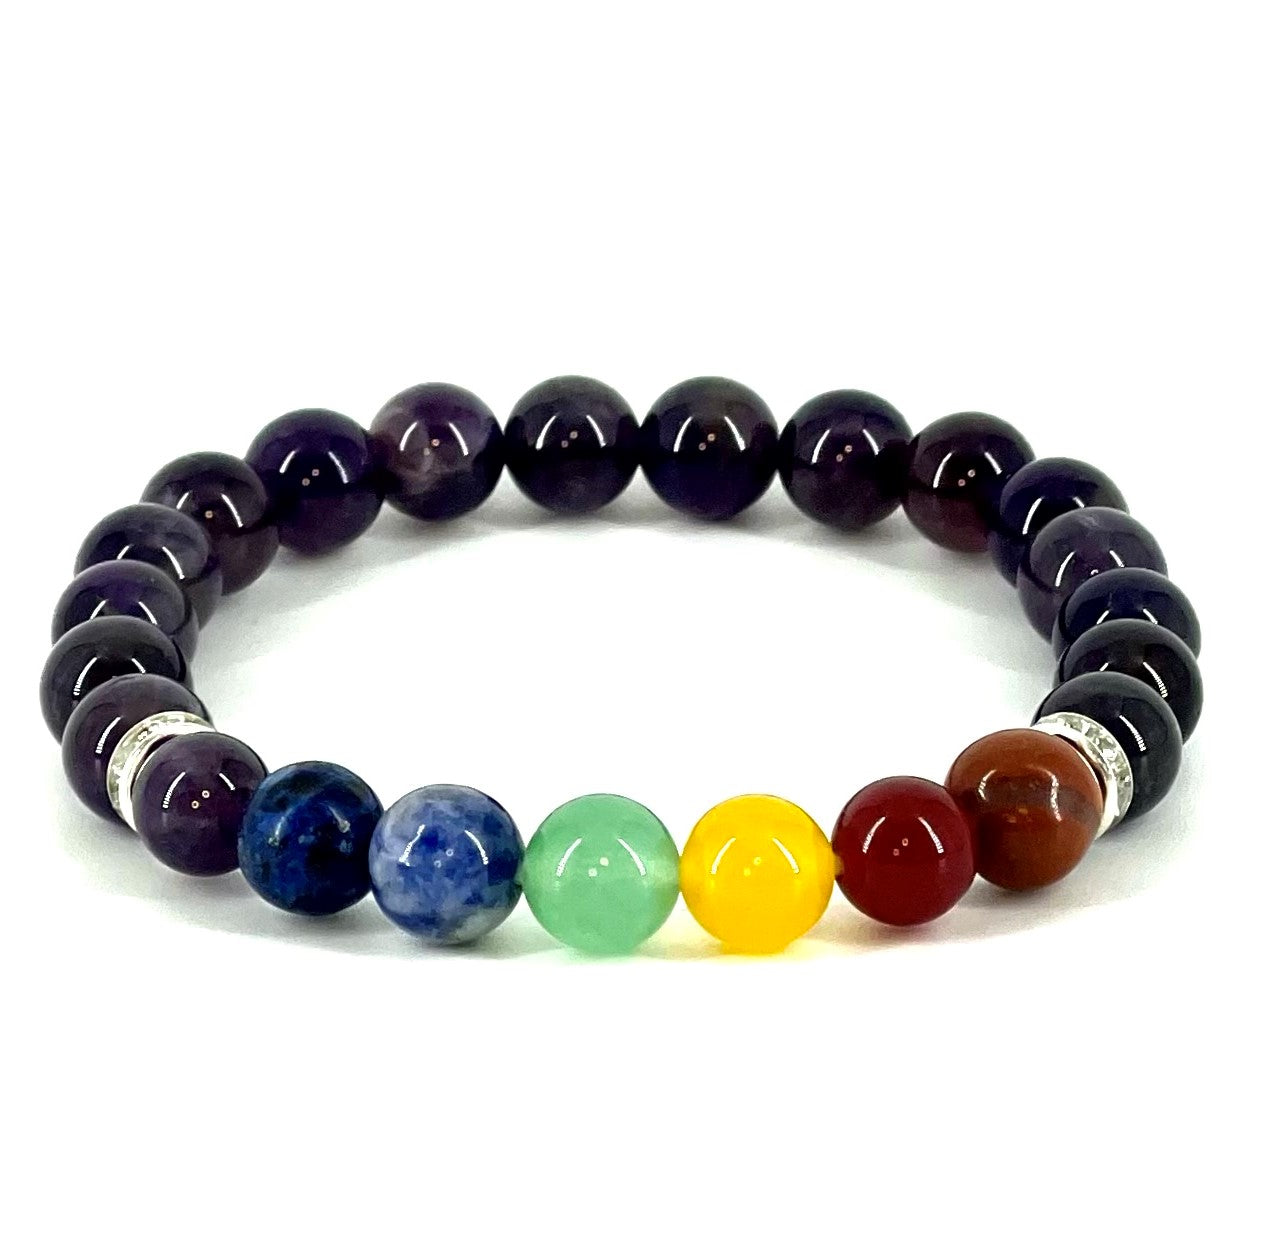 Amethyst Bracelet - With additional 7 Chakra Crystals Stones Crystal Shop